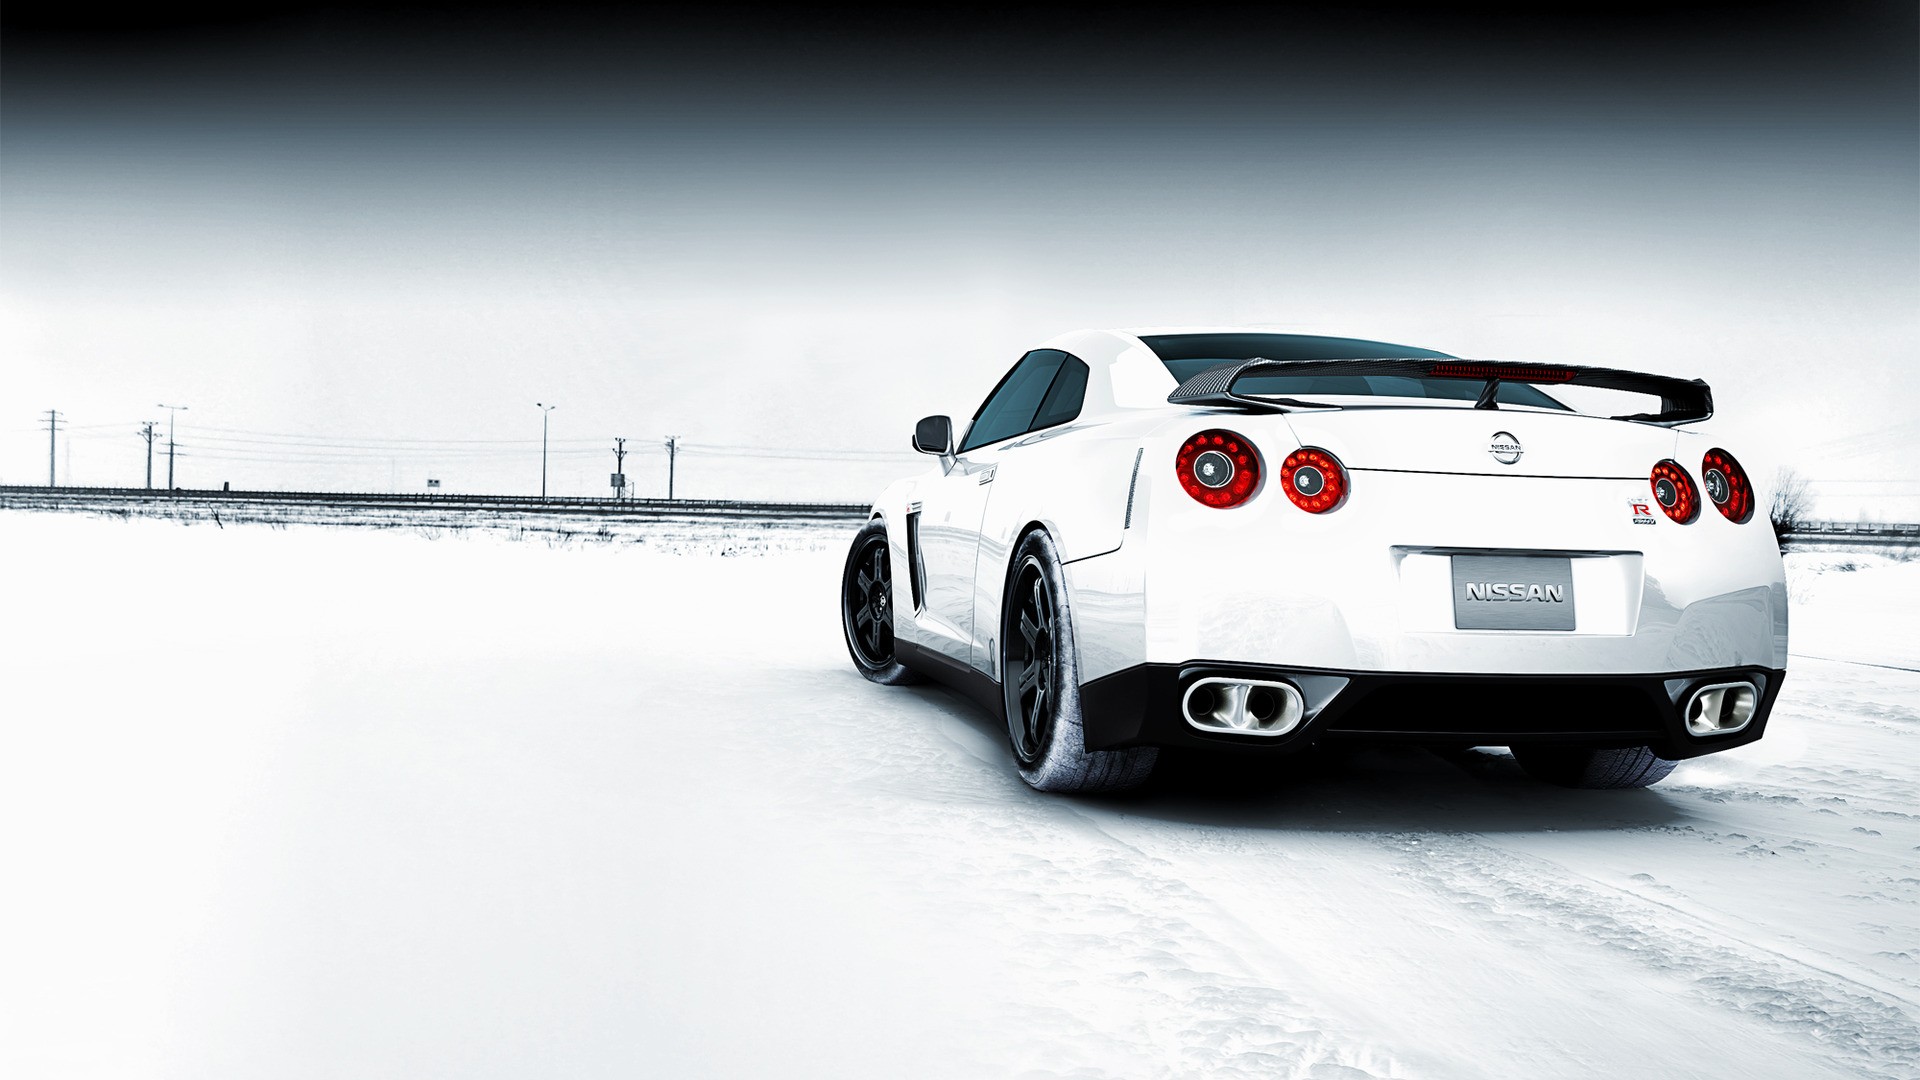 car, Snow, Nissan, Nissan GT R, Supercars, White Cars Wallpapers HD \/ Desktop and Mobile Backgrounds